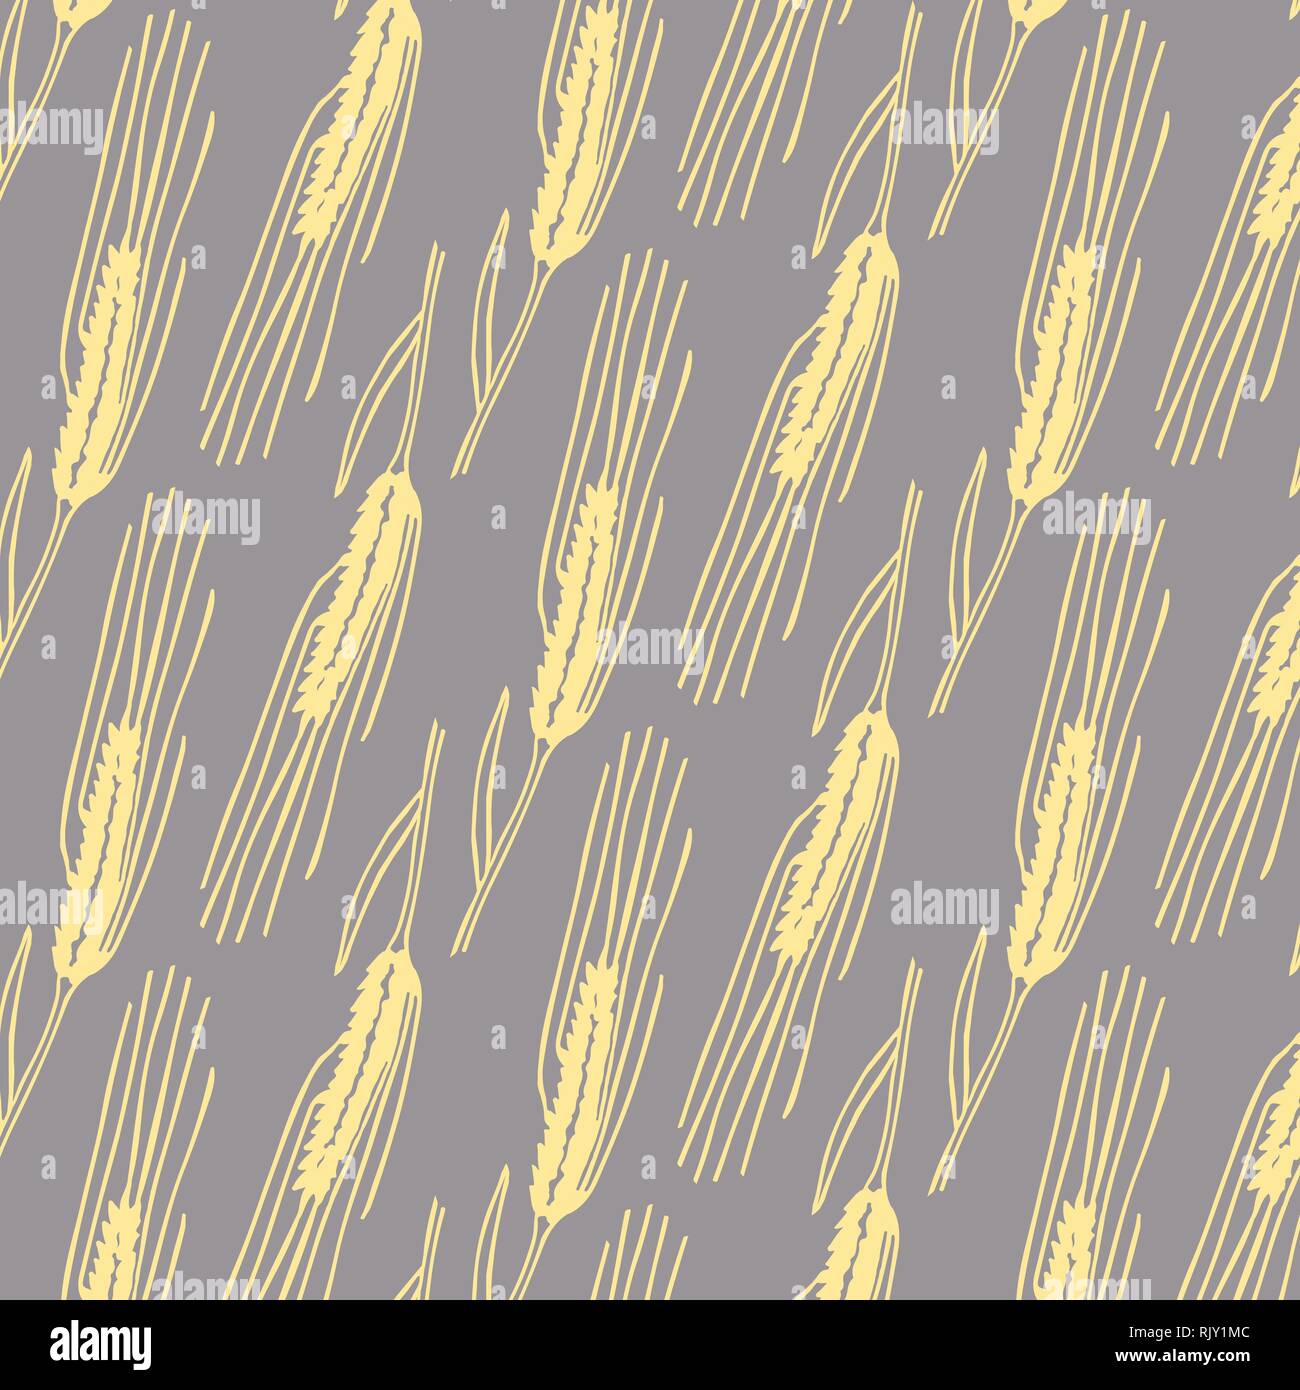 Hand drawn spring wheat vector pattern in yellow color on a gray background Stock Vector